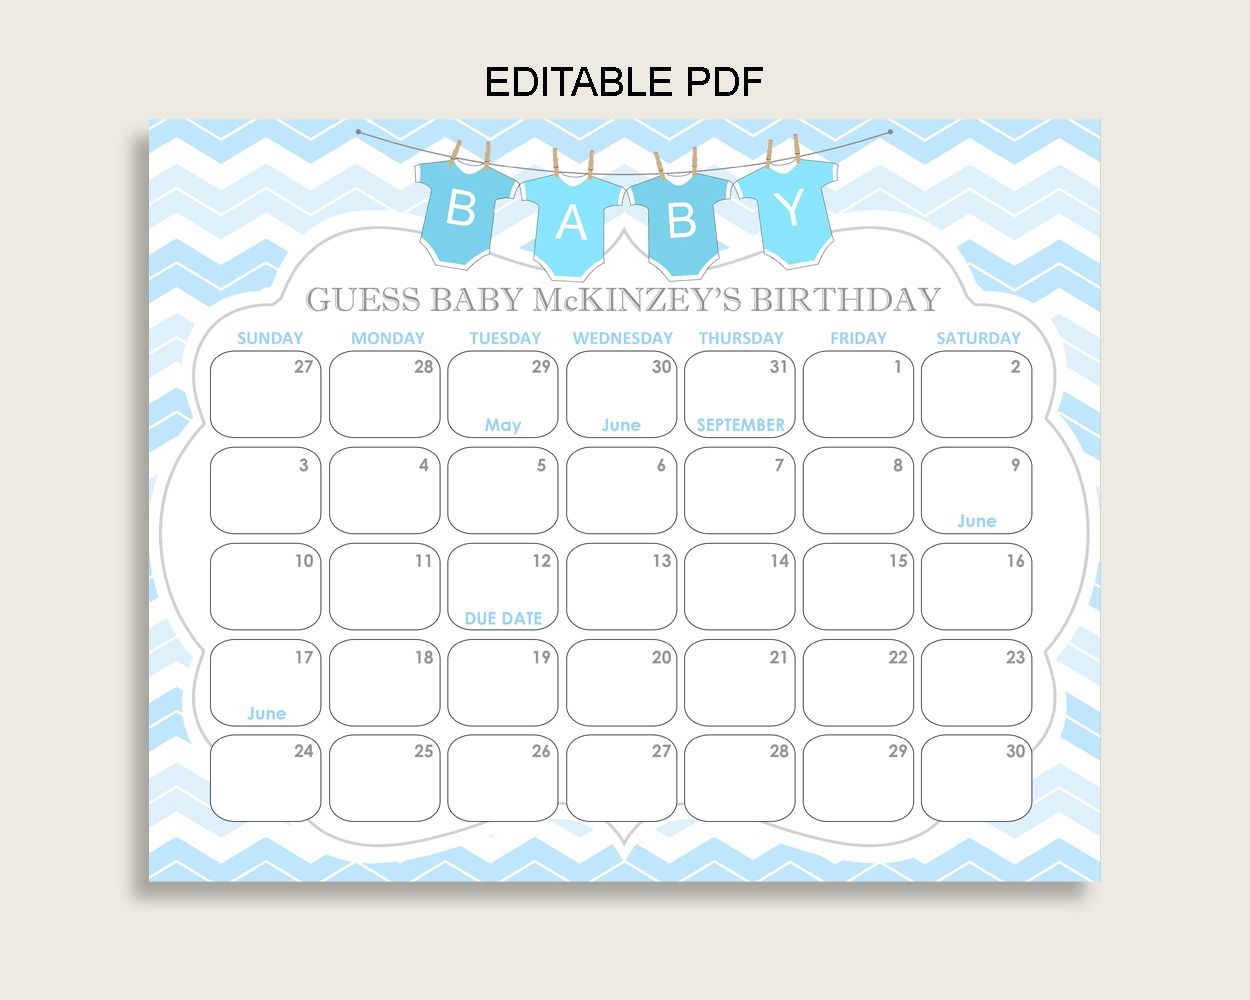 guess the due date calendar template free 24